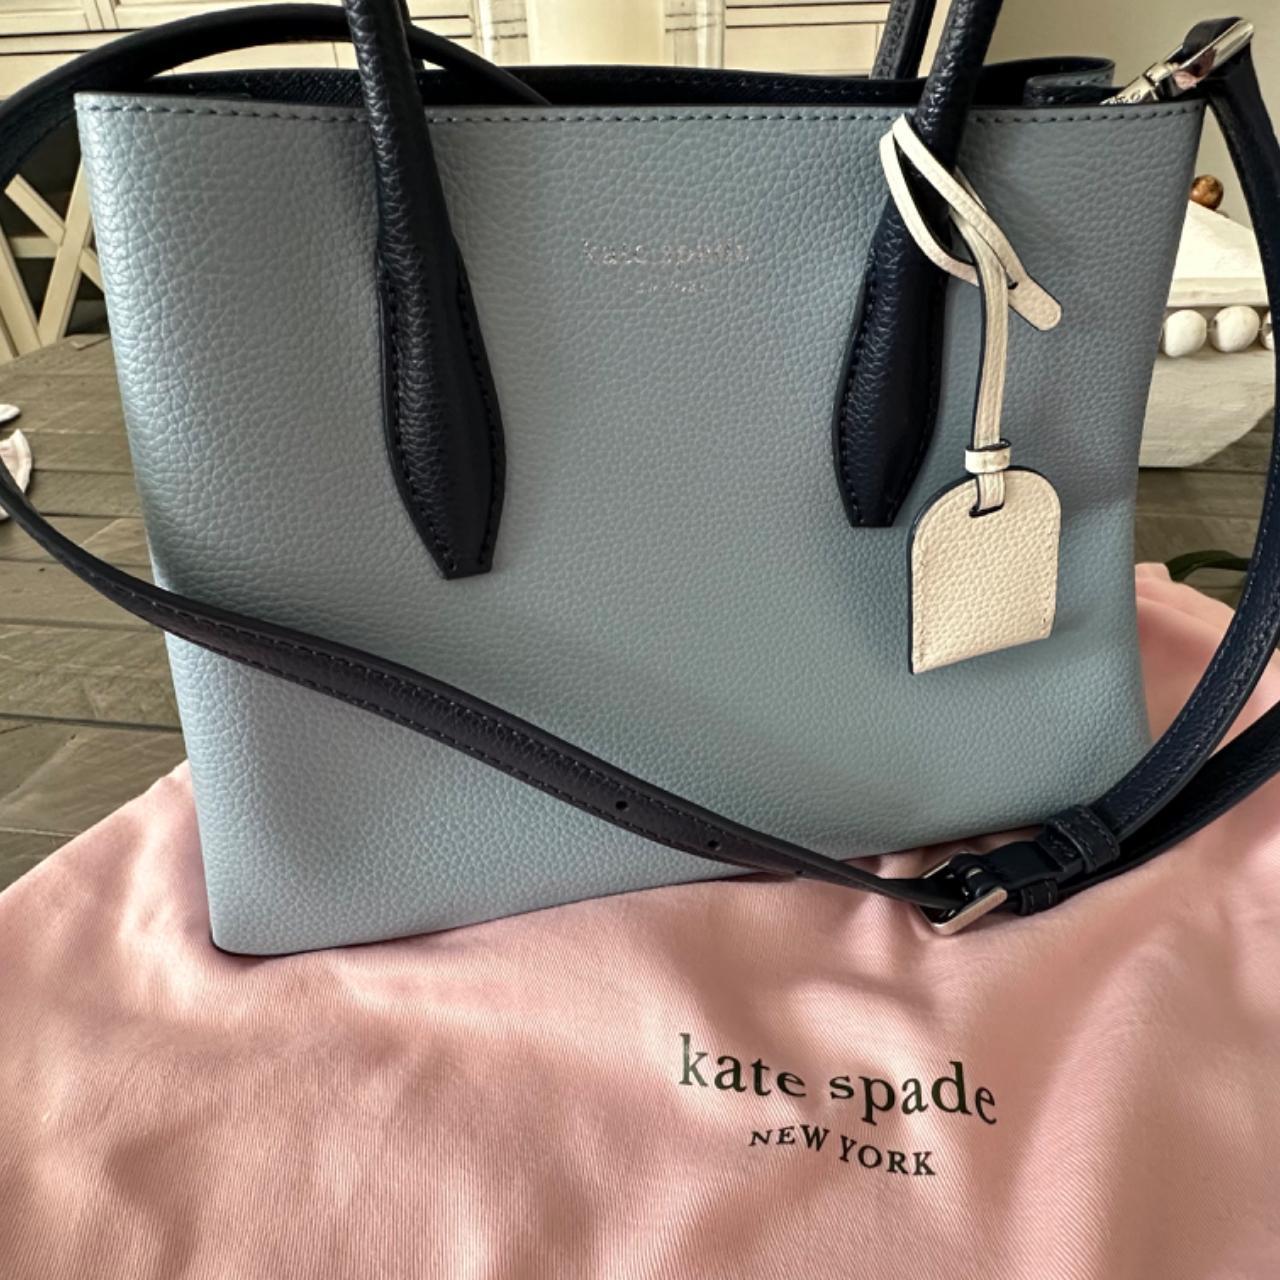 Simply Chic - Anybody in the market for a spring handbag? Check out these Kate  Spade bags at our Greenwood location! ​ ​Gently Used Kate Spade Purses:  ​Left $65 ​Center $115 ​Right